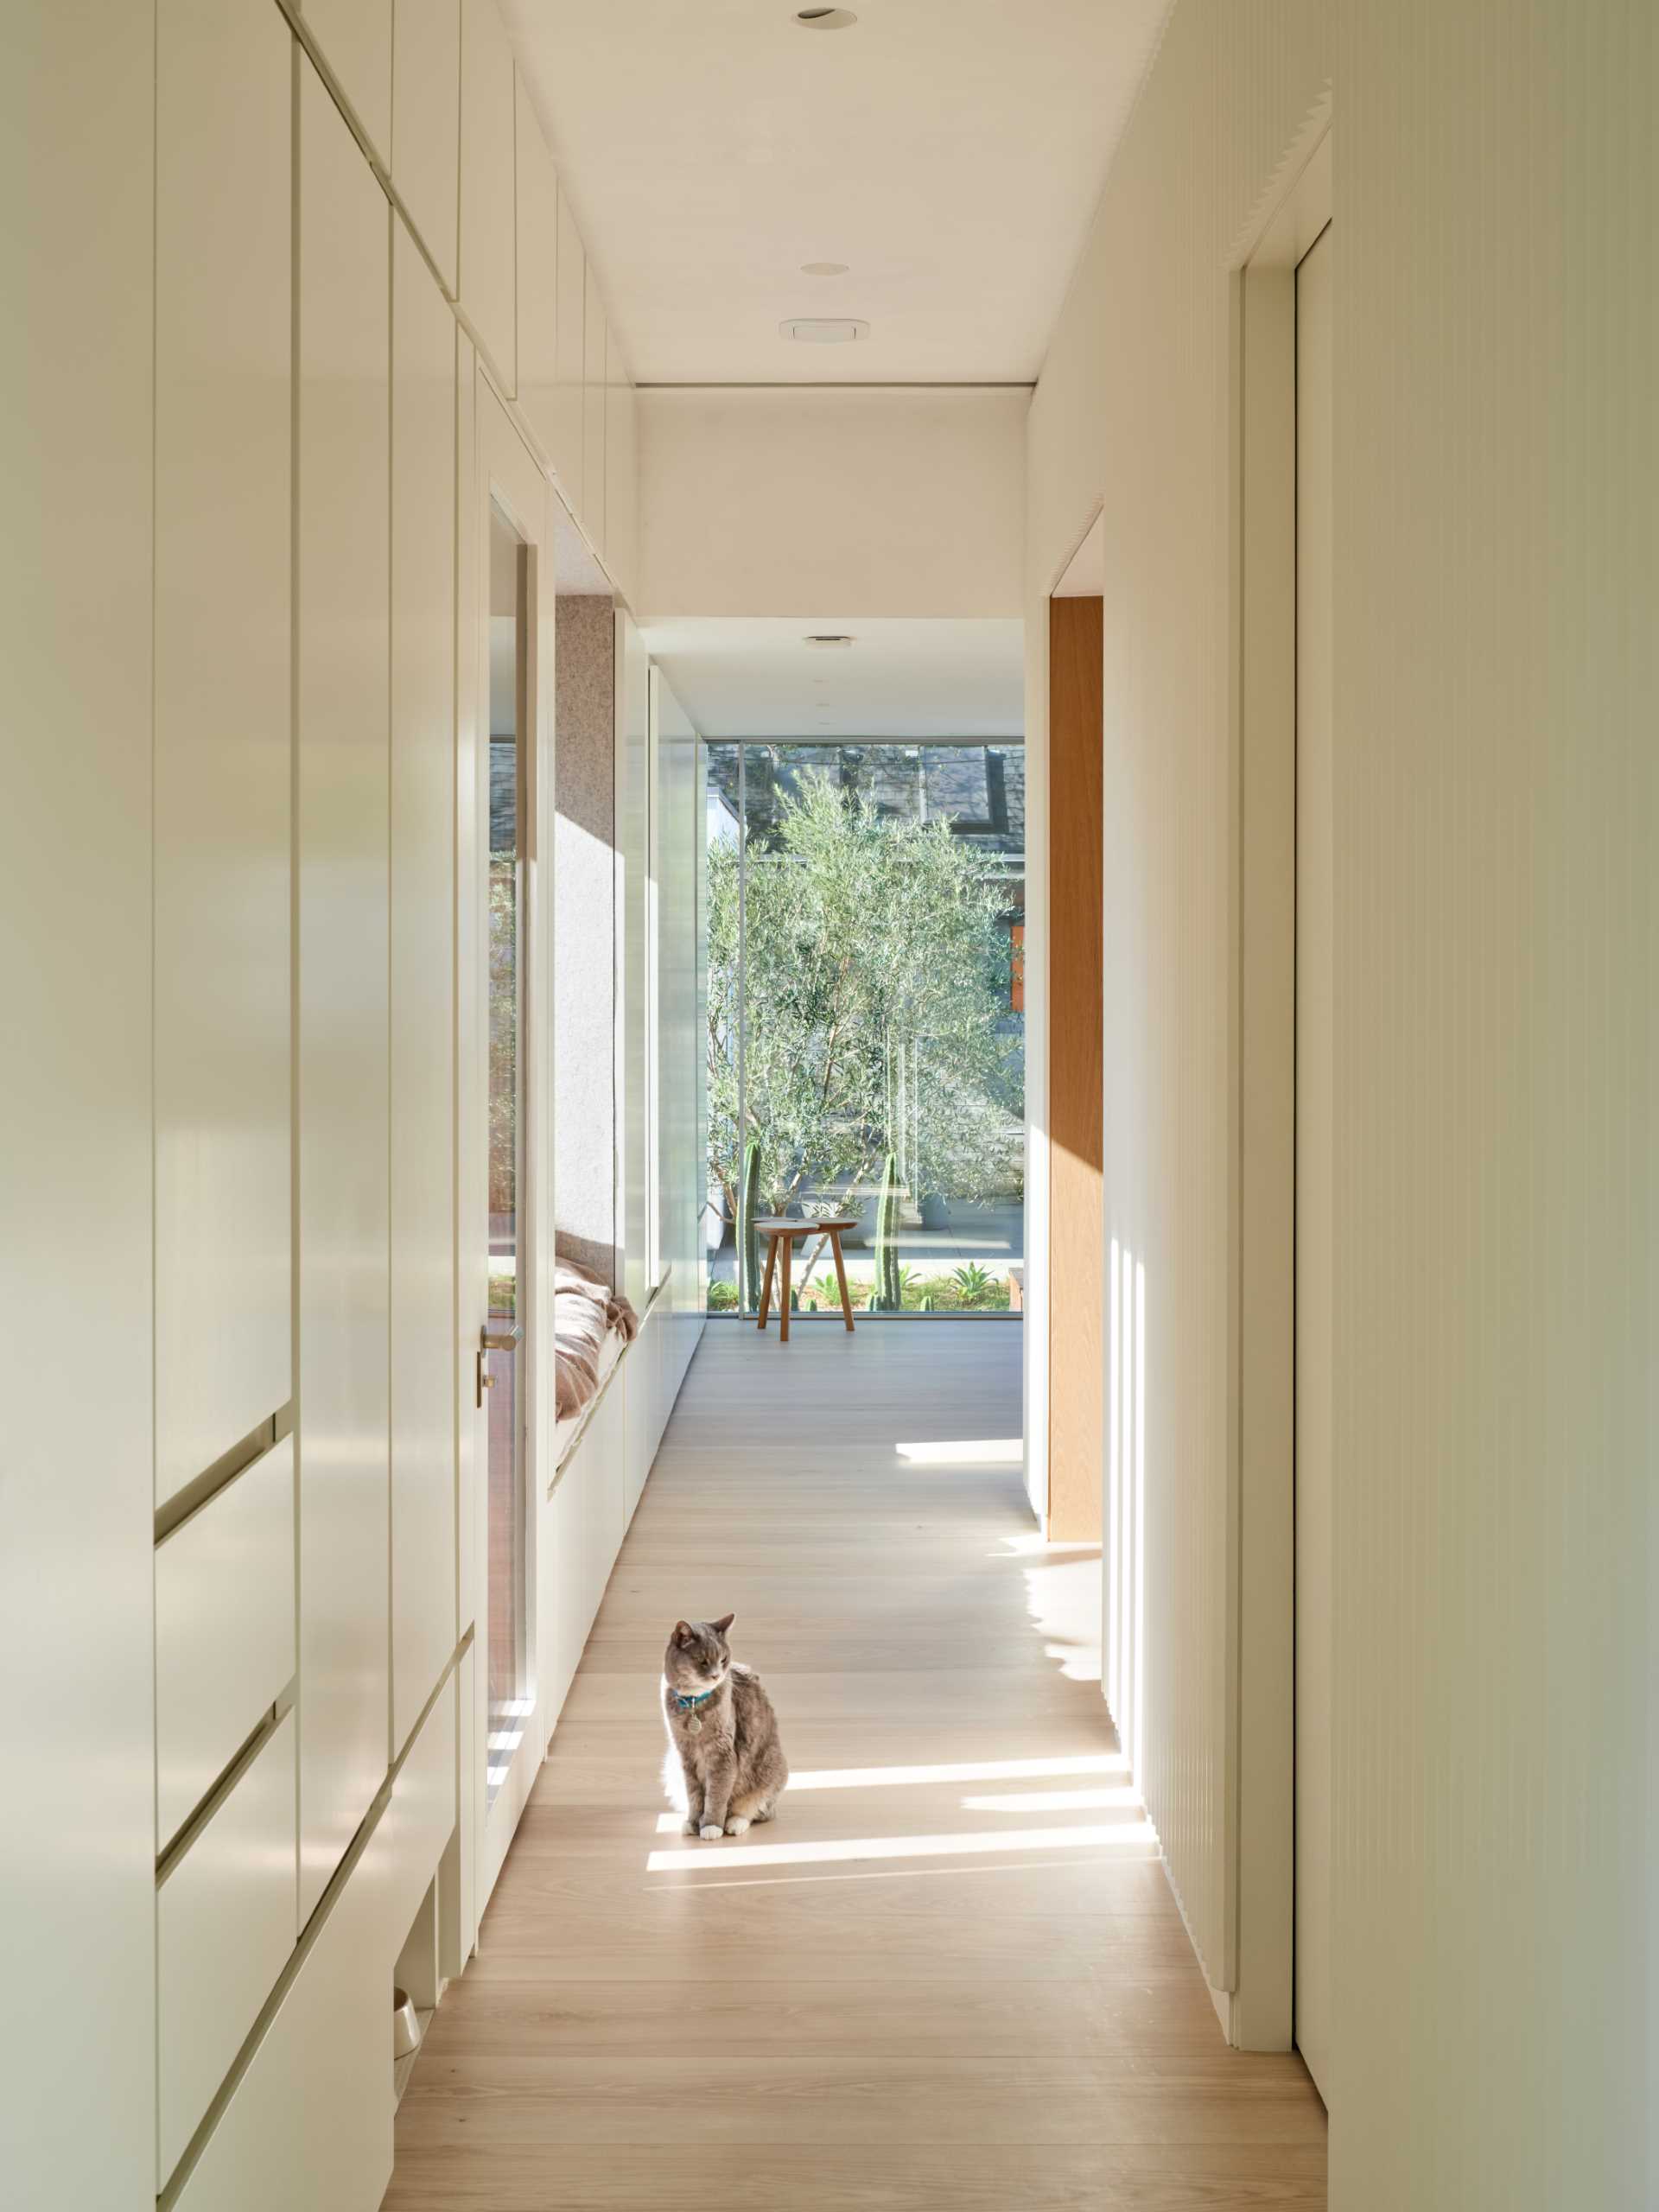 A design detail in this modern hallway is a small section of the cabinets dedicated to a cat's food station and built-in litterbox.